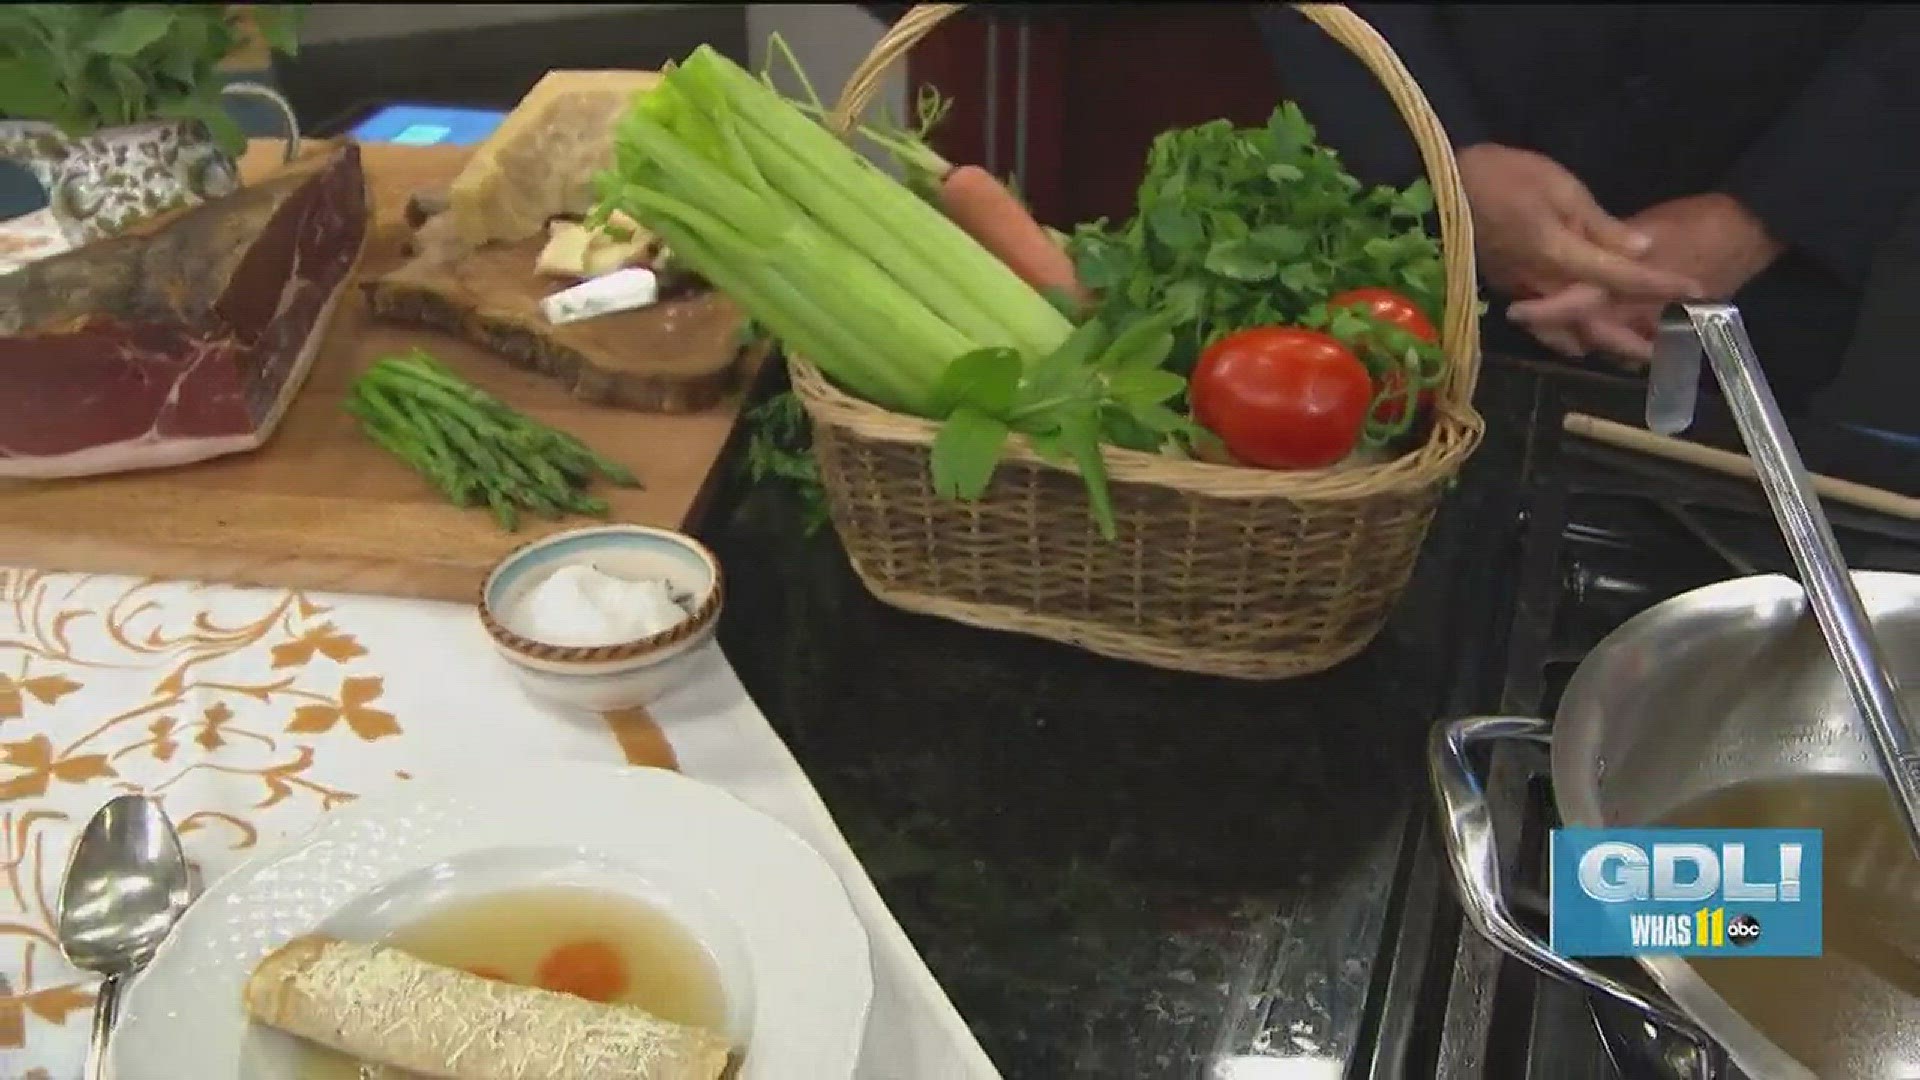 Gina Stipo teaches Italian cooking classes and sets the table every week at her restaurant "At the Italian Table." She joins GDL to show us how simple and elegant Italian cooking can be with a few recipes.